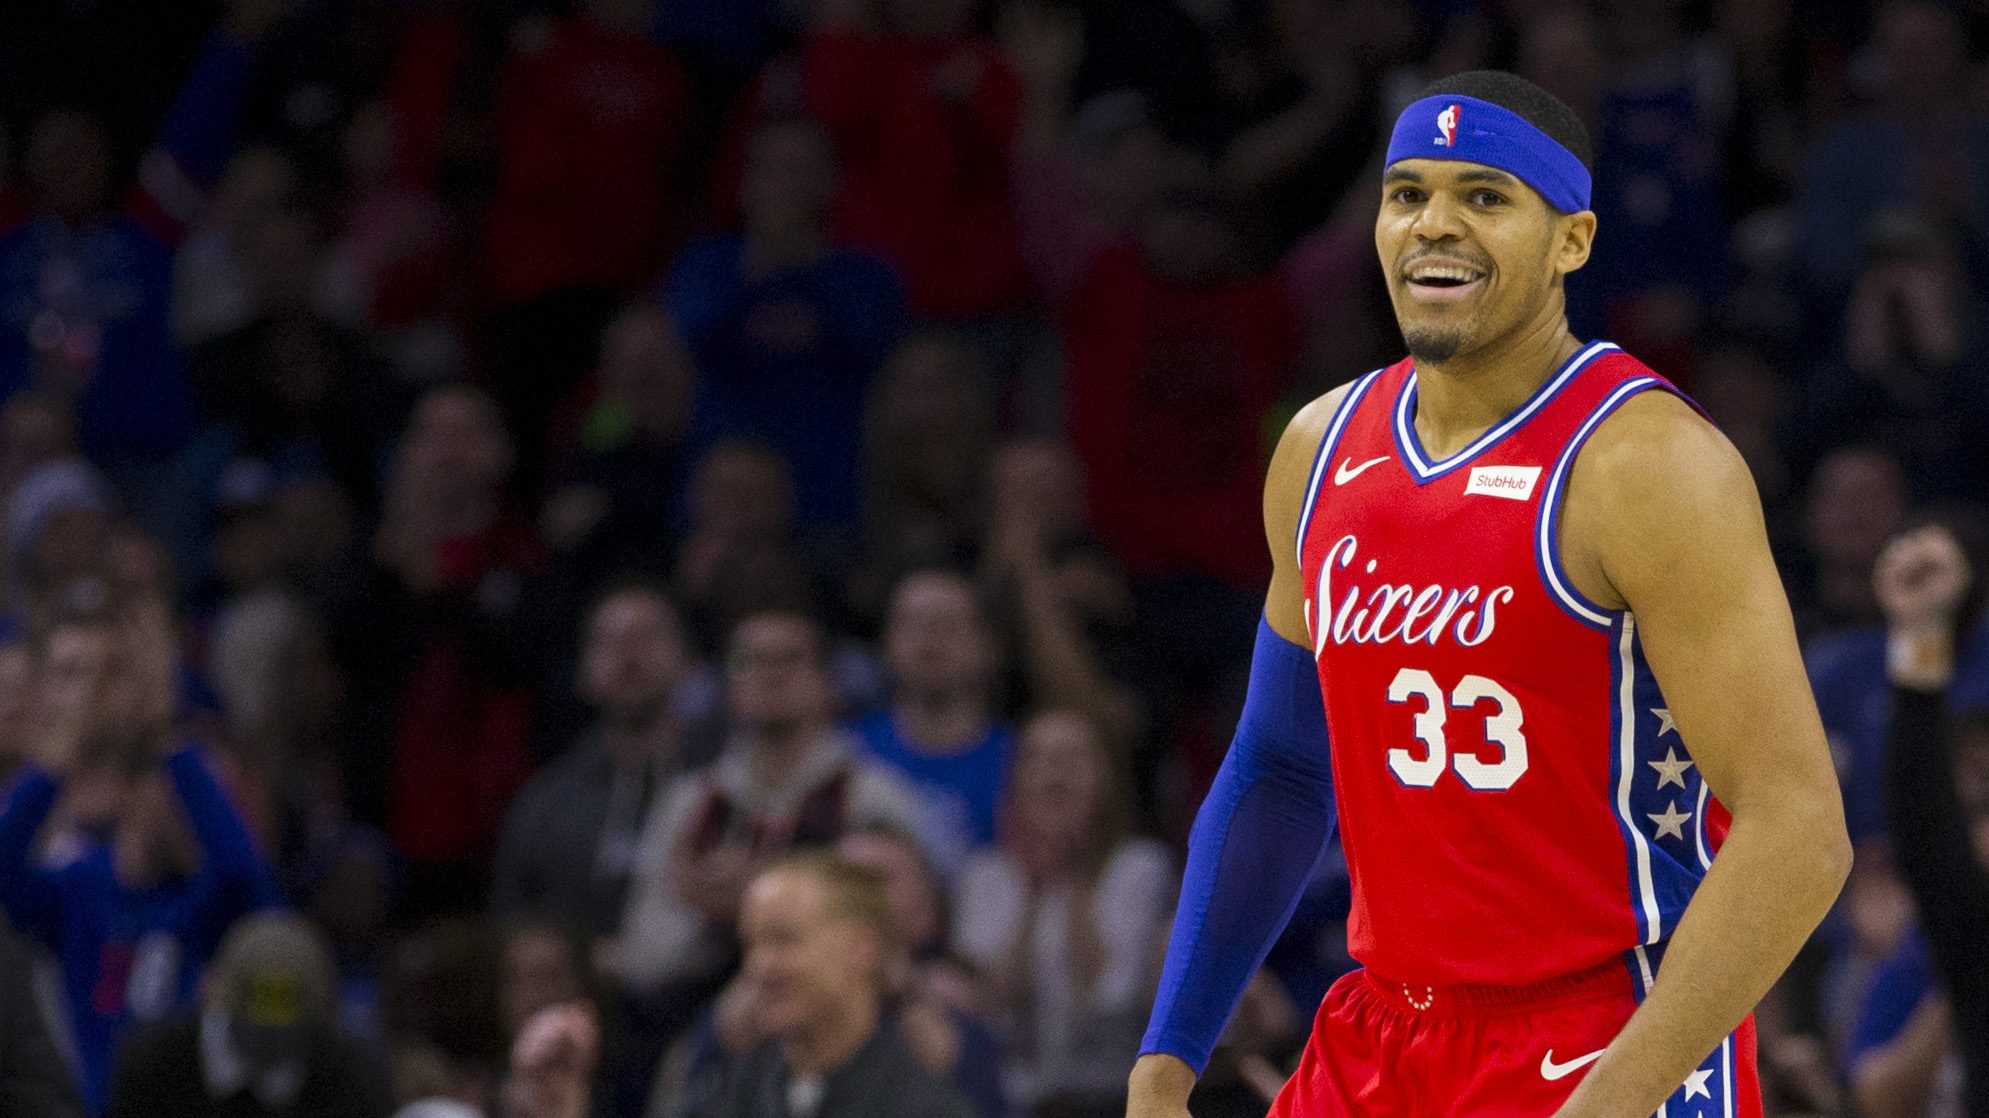 Tobias Harris Trade Did 76ers or Clippers Win Deal?